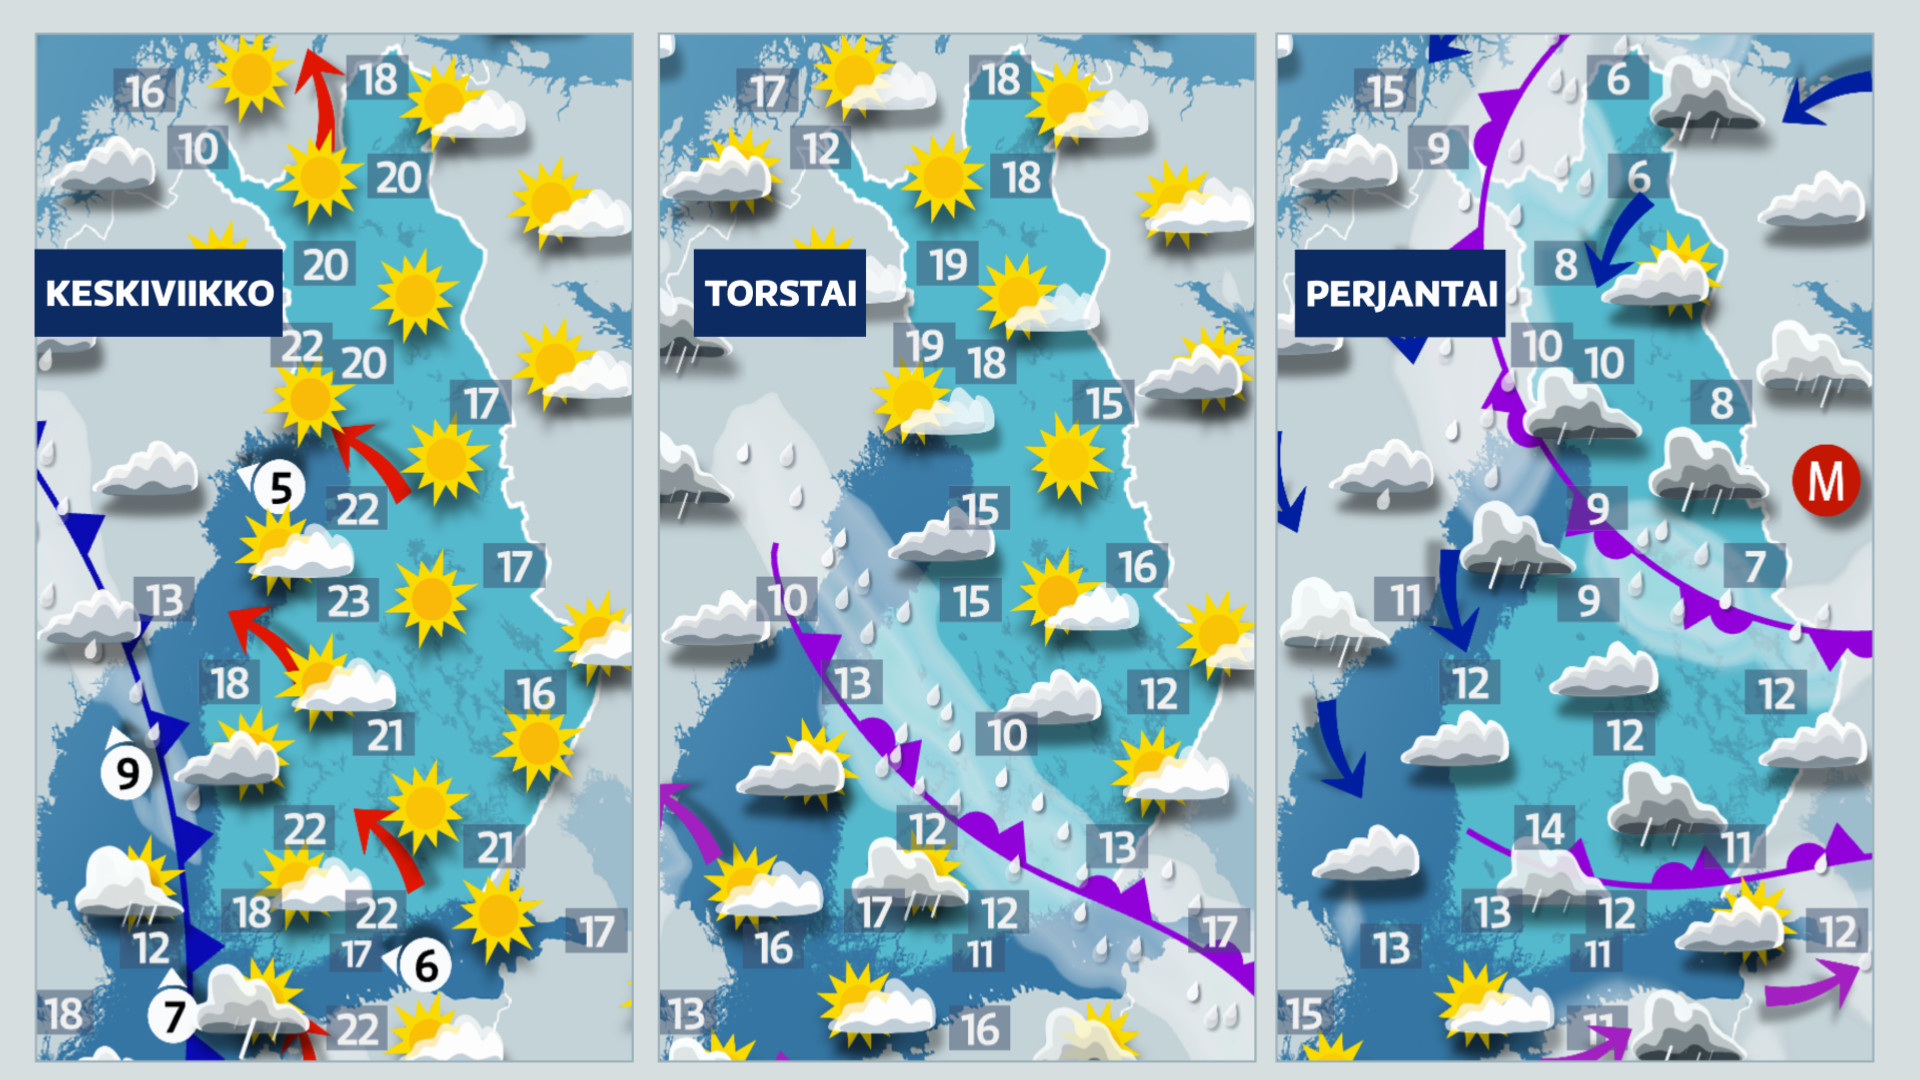 Finland’s mild weather is getting wetter and cooler